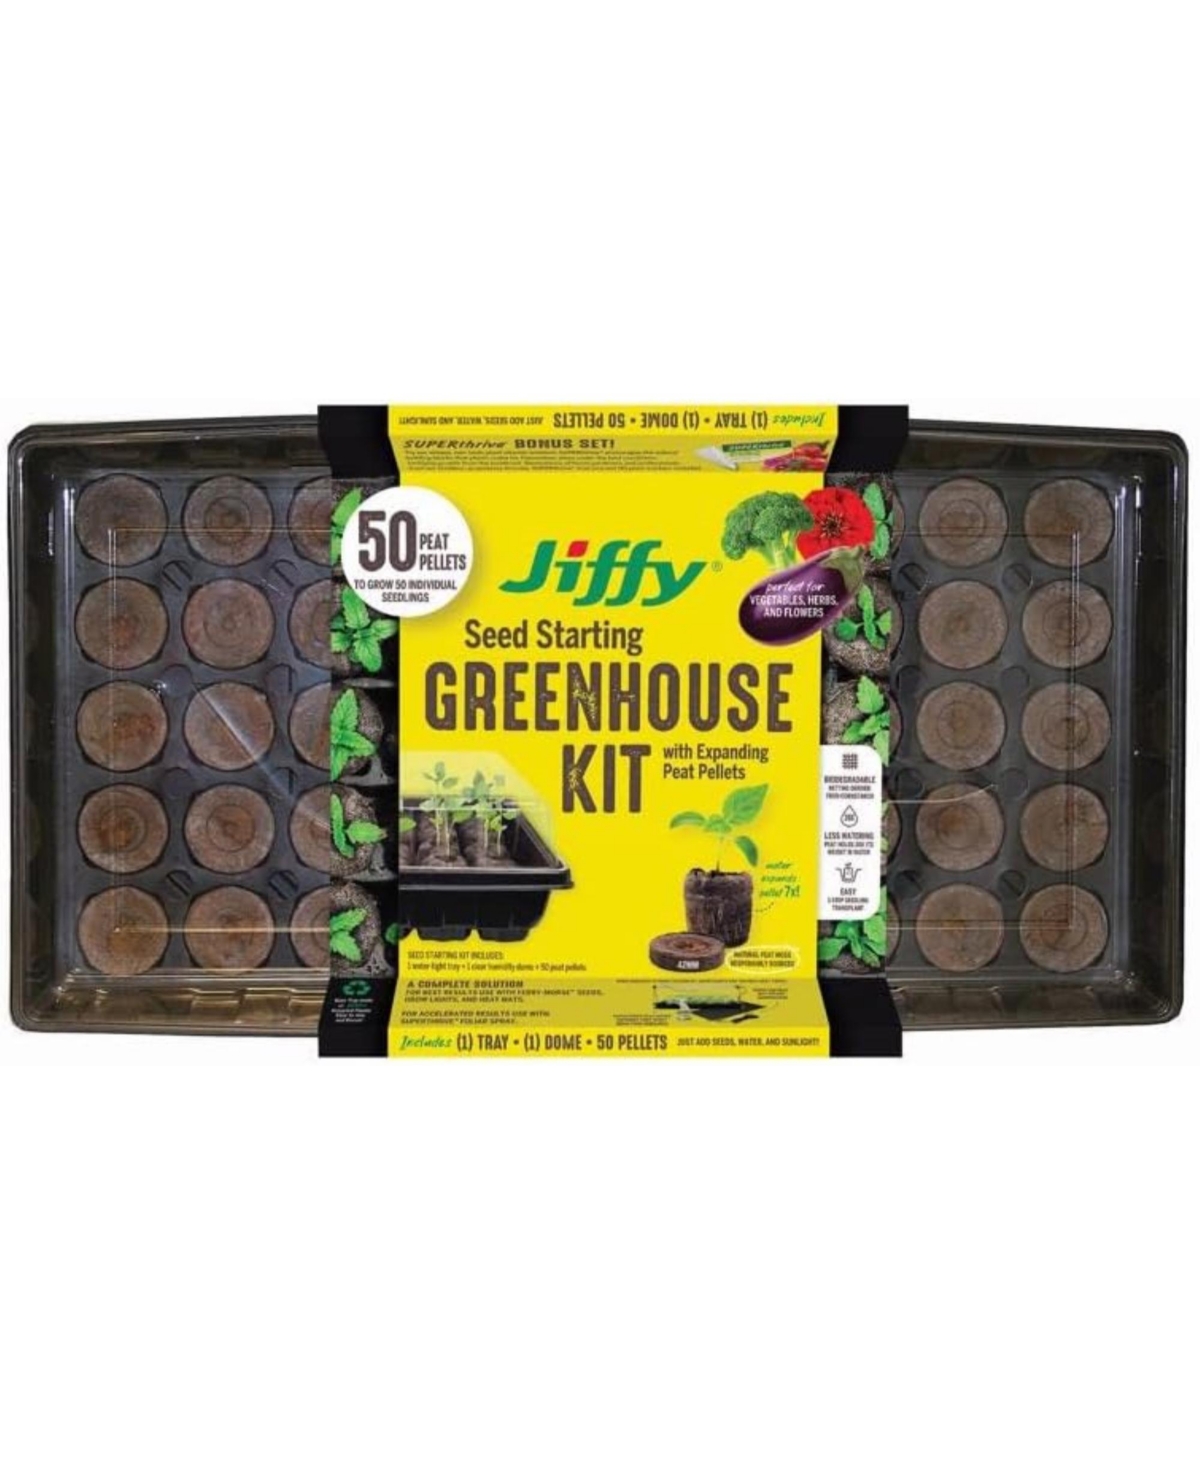 11x22 Seed Starting Greenhouse Kit with 50 Expanding Peat Pellets (Pack of 1) - Brown